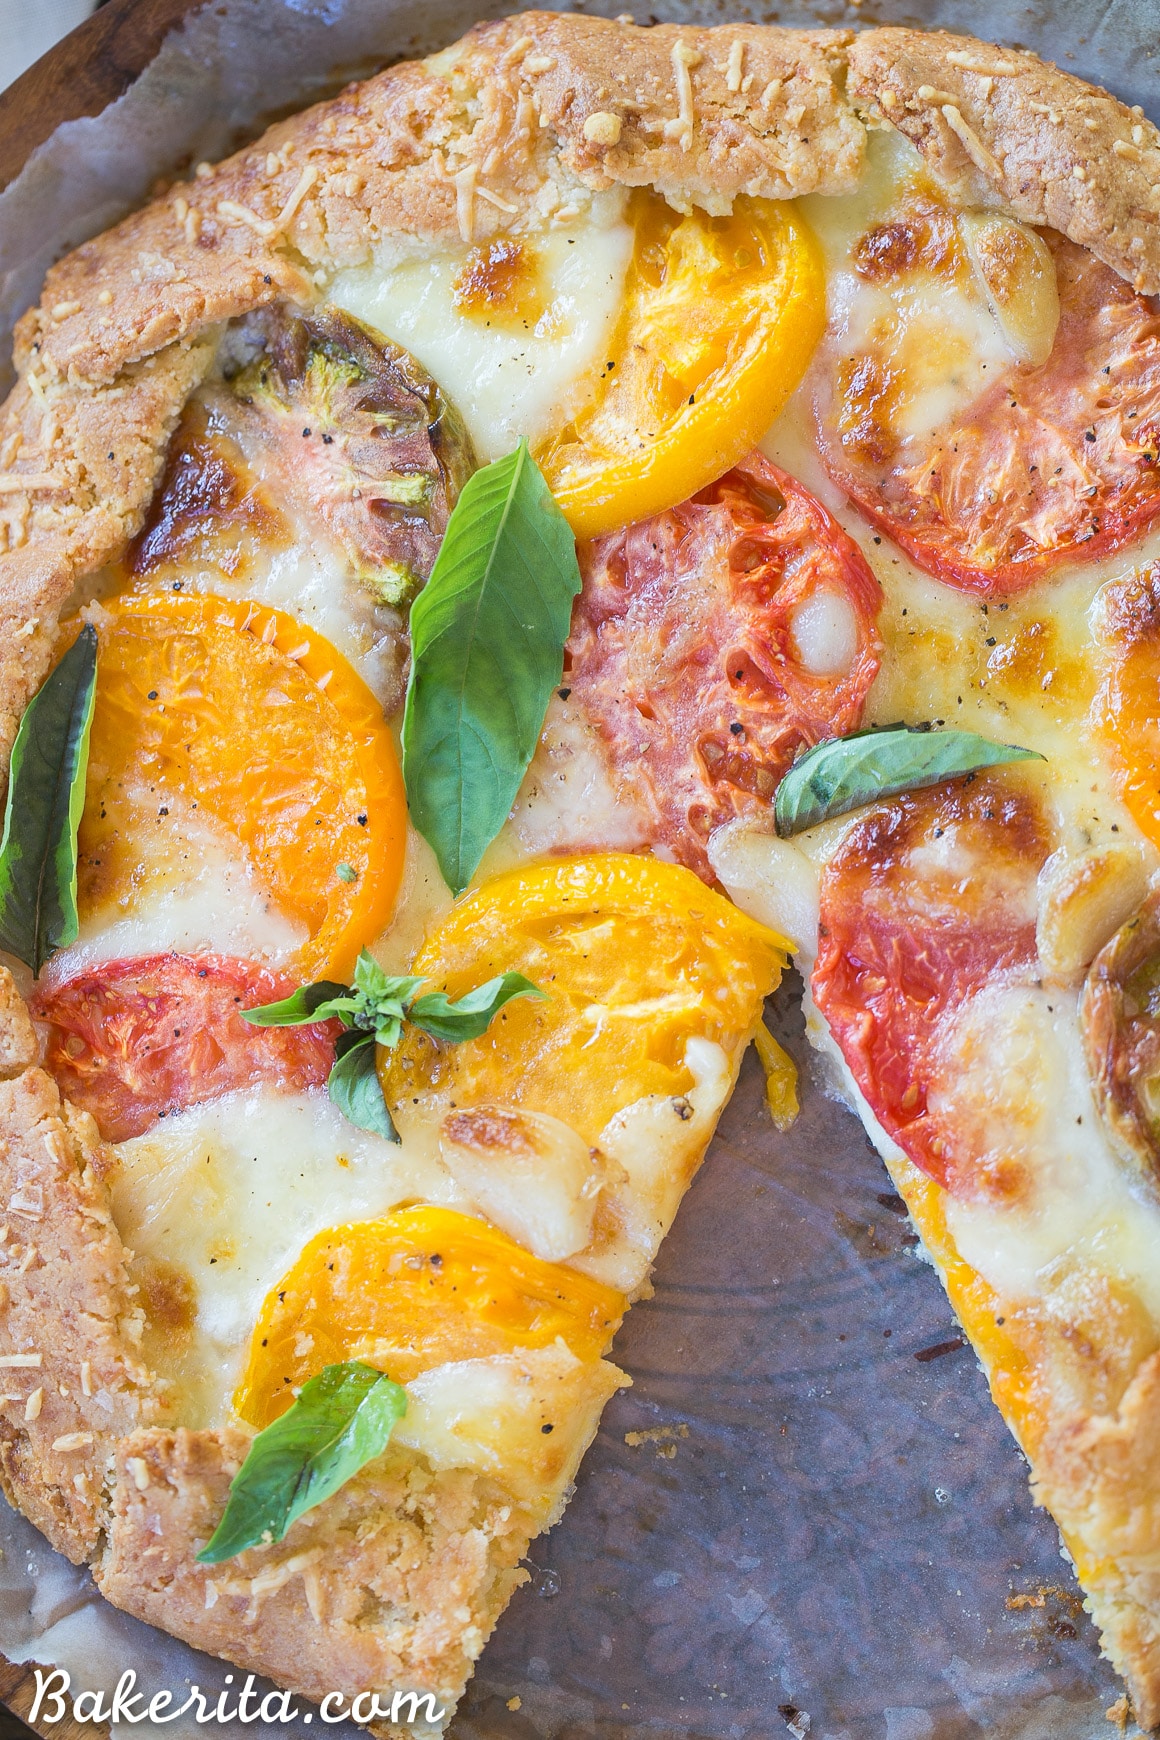 This Mozzarella Heirloom Tomato Galette showcases beautiful heirloom tomatoes bubbling with melted mozzarella cheese, all tucked into a gluten-free + grain-free Parmesan crust. 